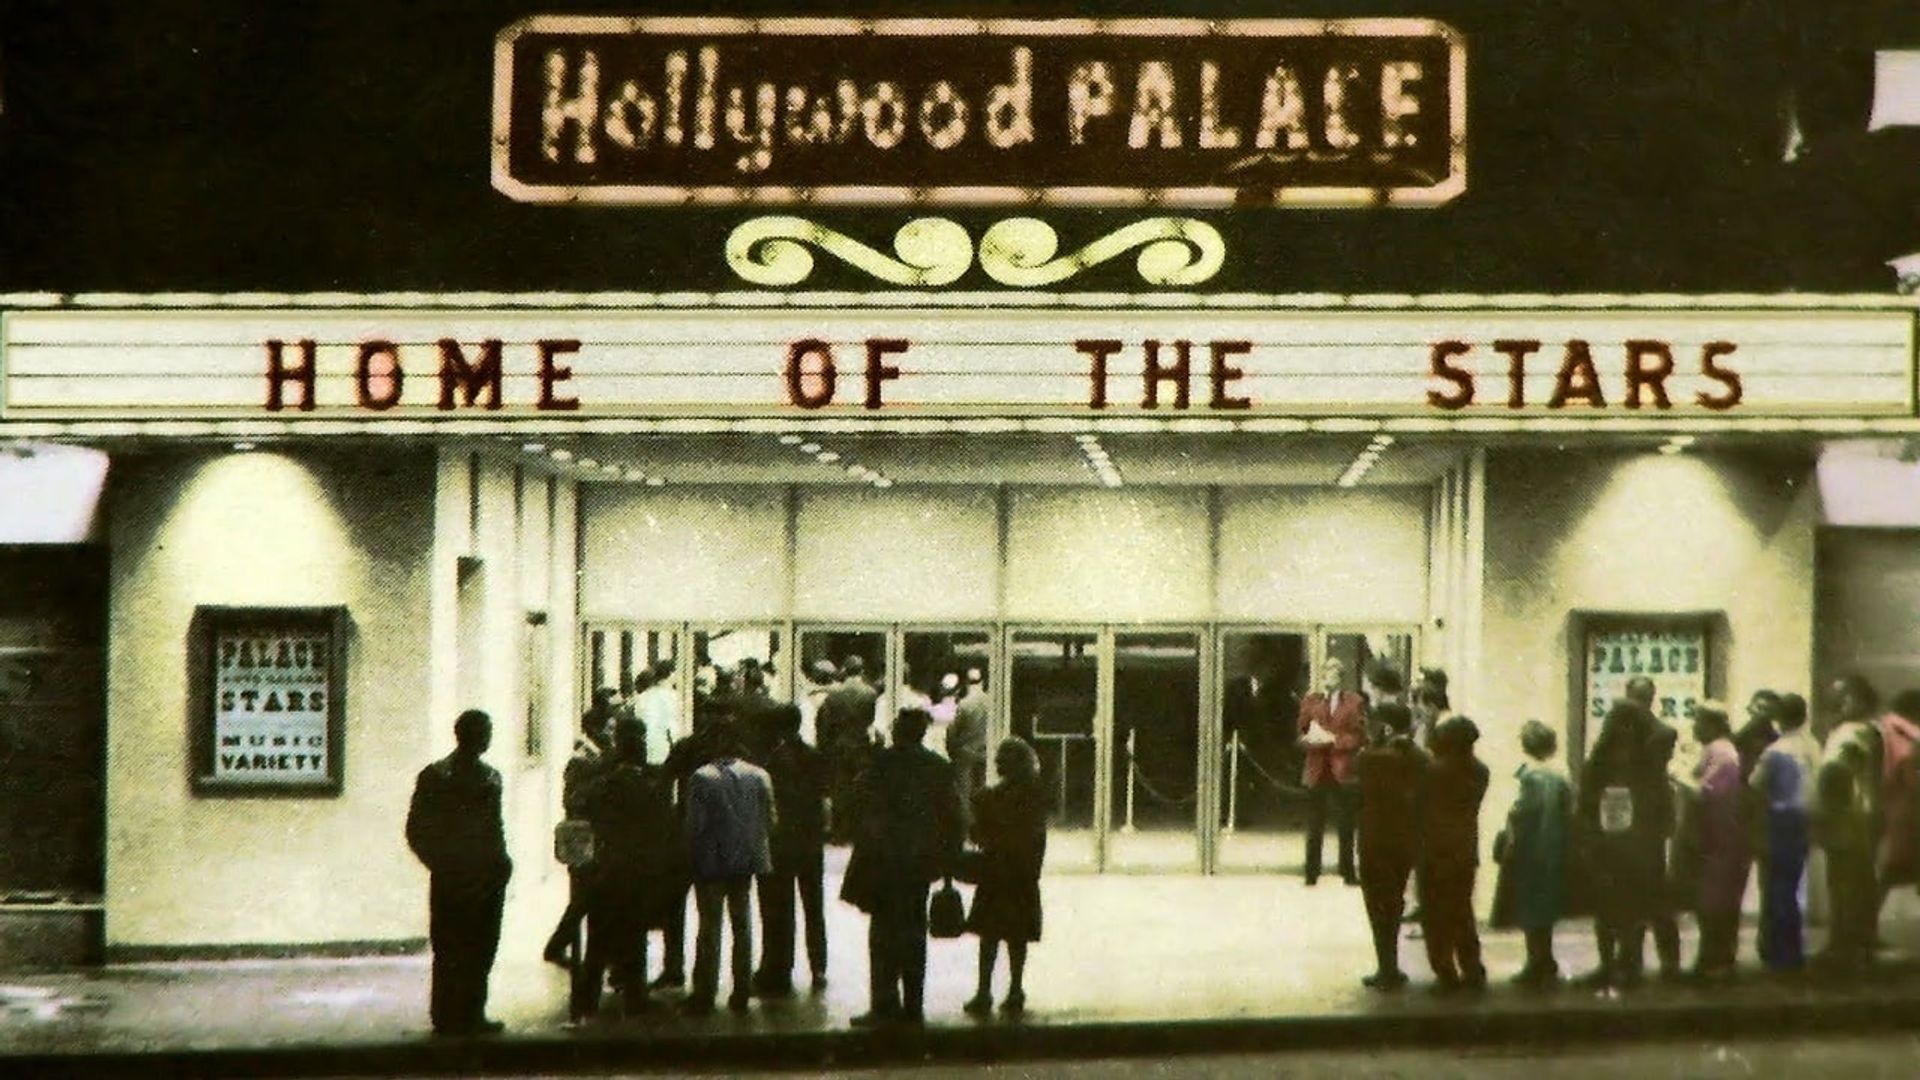 The Hollywood Palace background